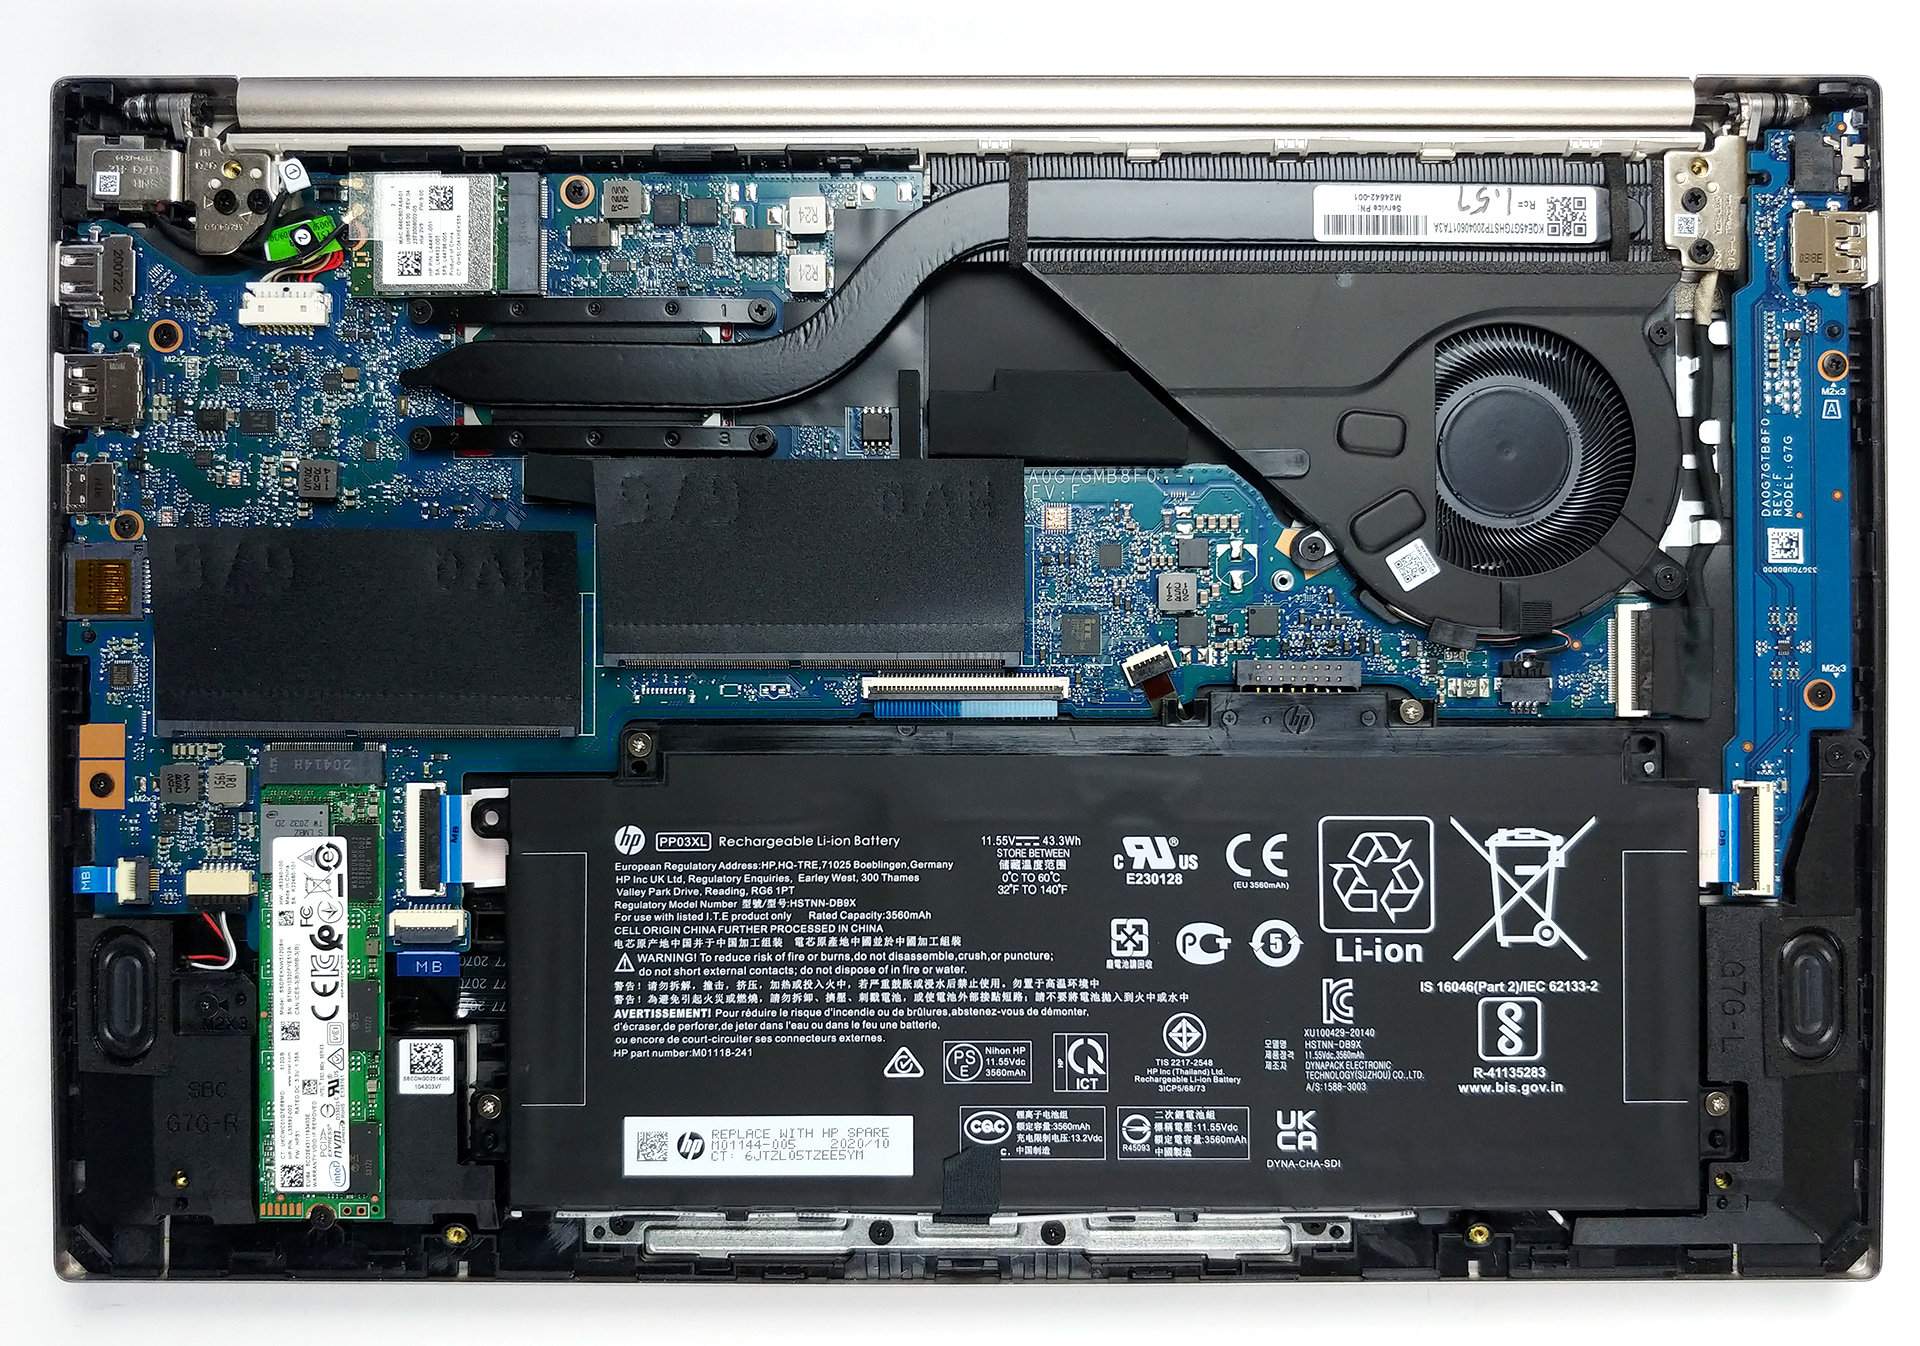 Removing & replacing parts for HP 14-dq0000 Laptop PC